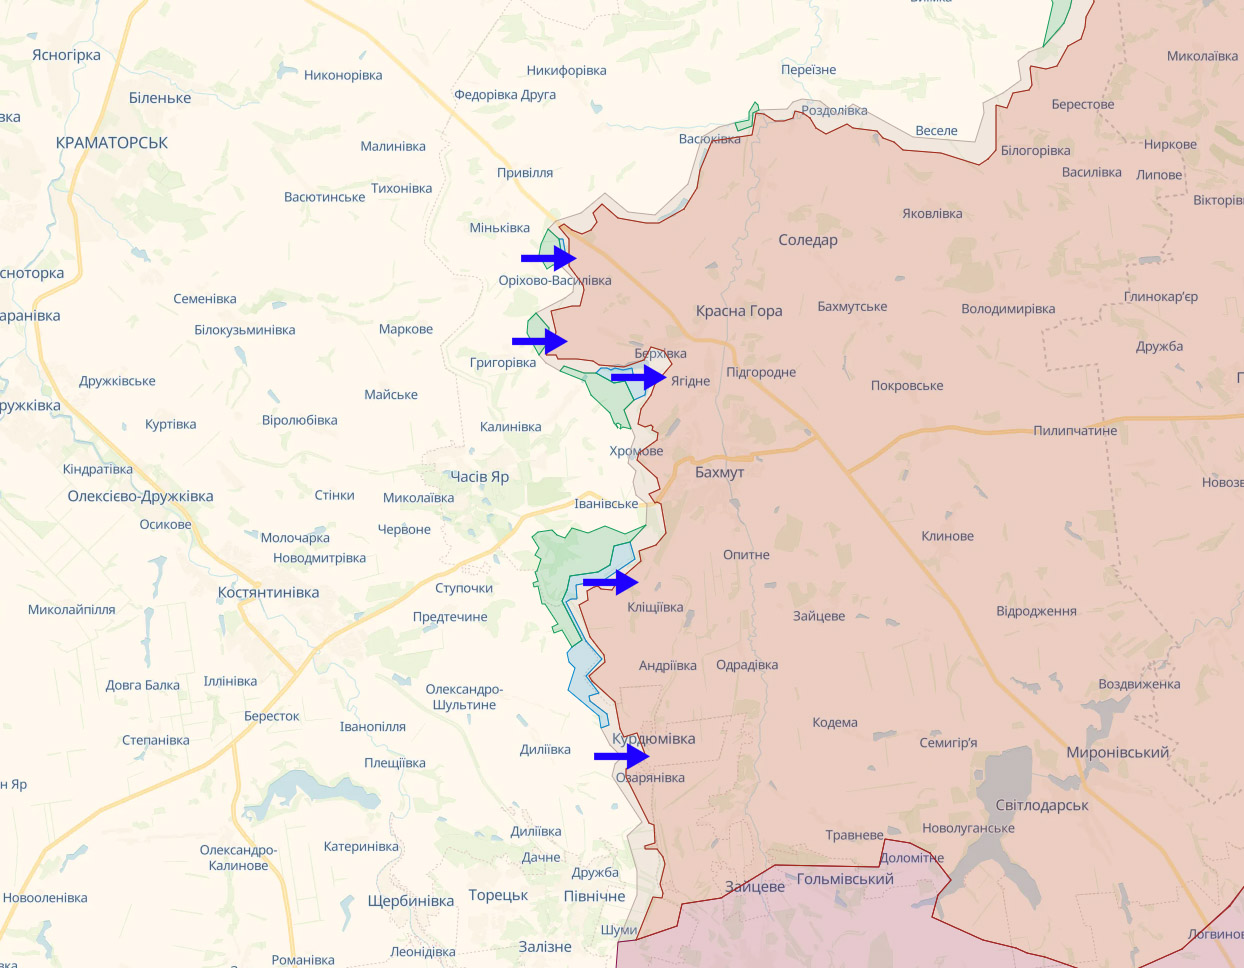 The approximate directions of the Ukrainian attacks on June 24 / Map credit: Deep State UA